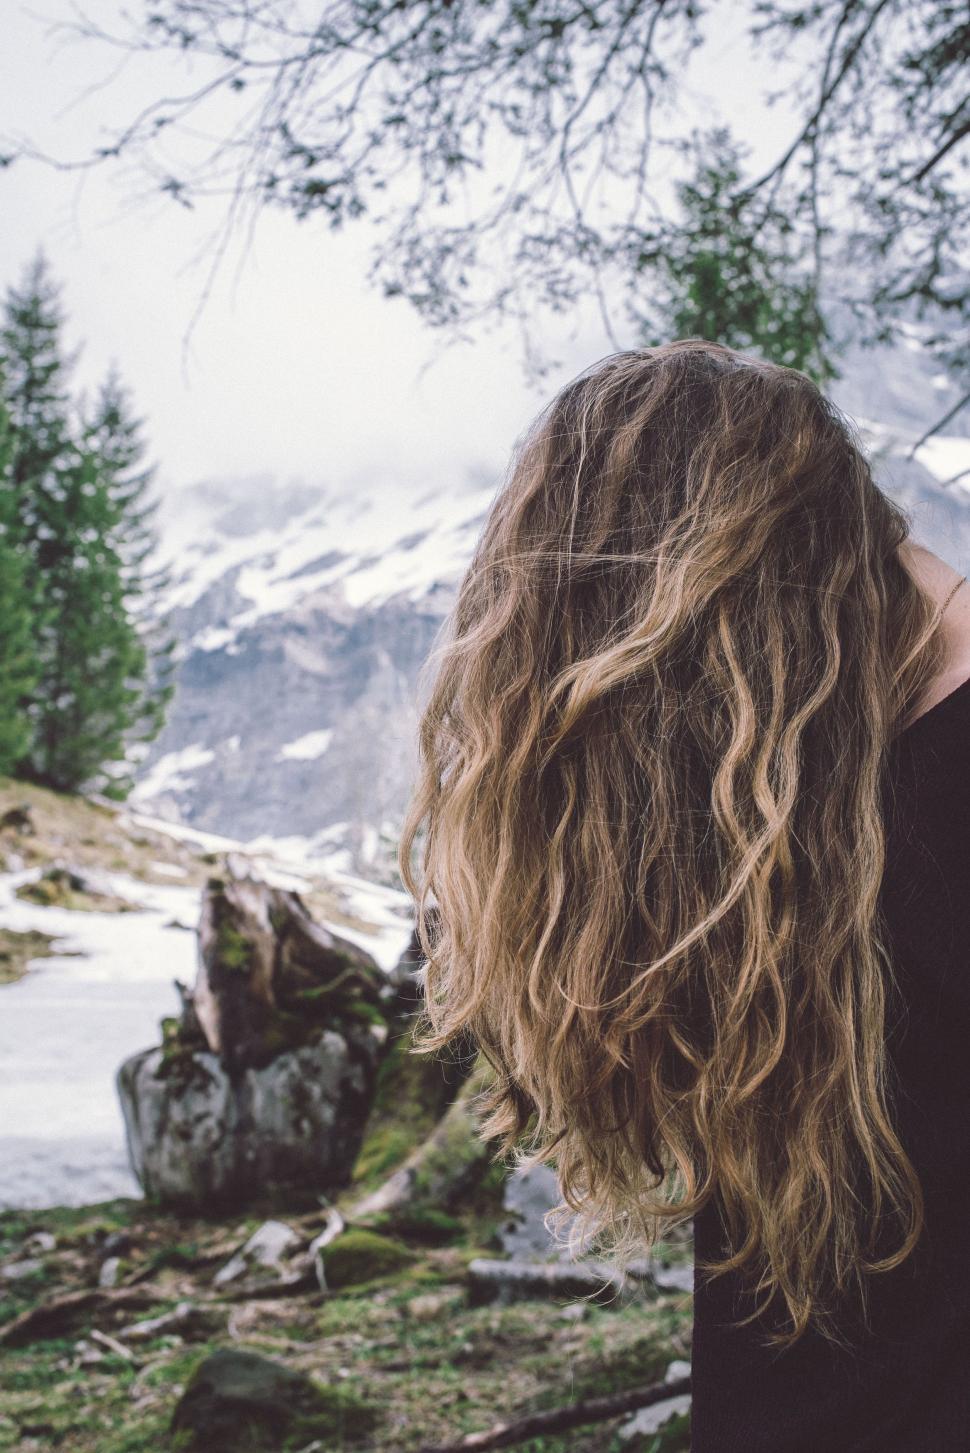 Free Image of Woman With Long Hair Standing in Front of Mountain 